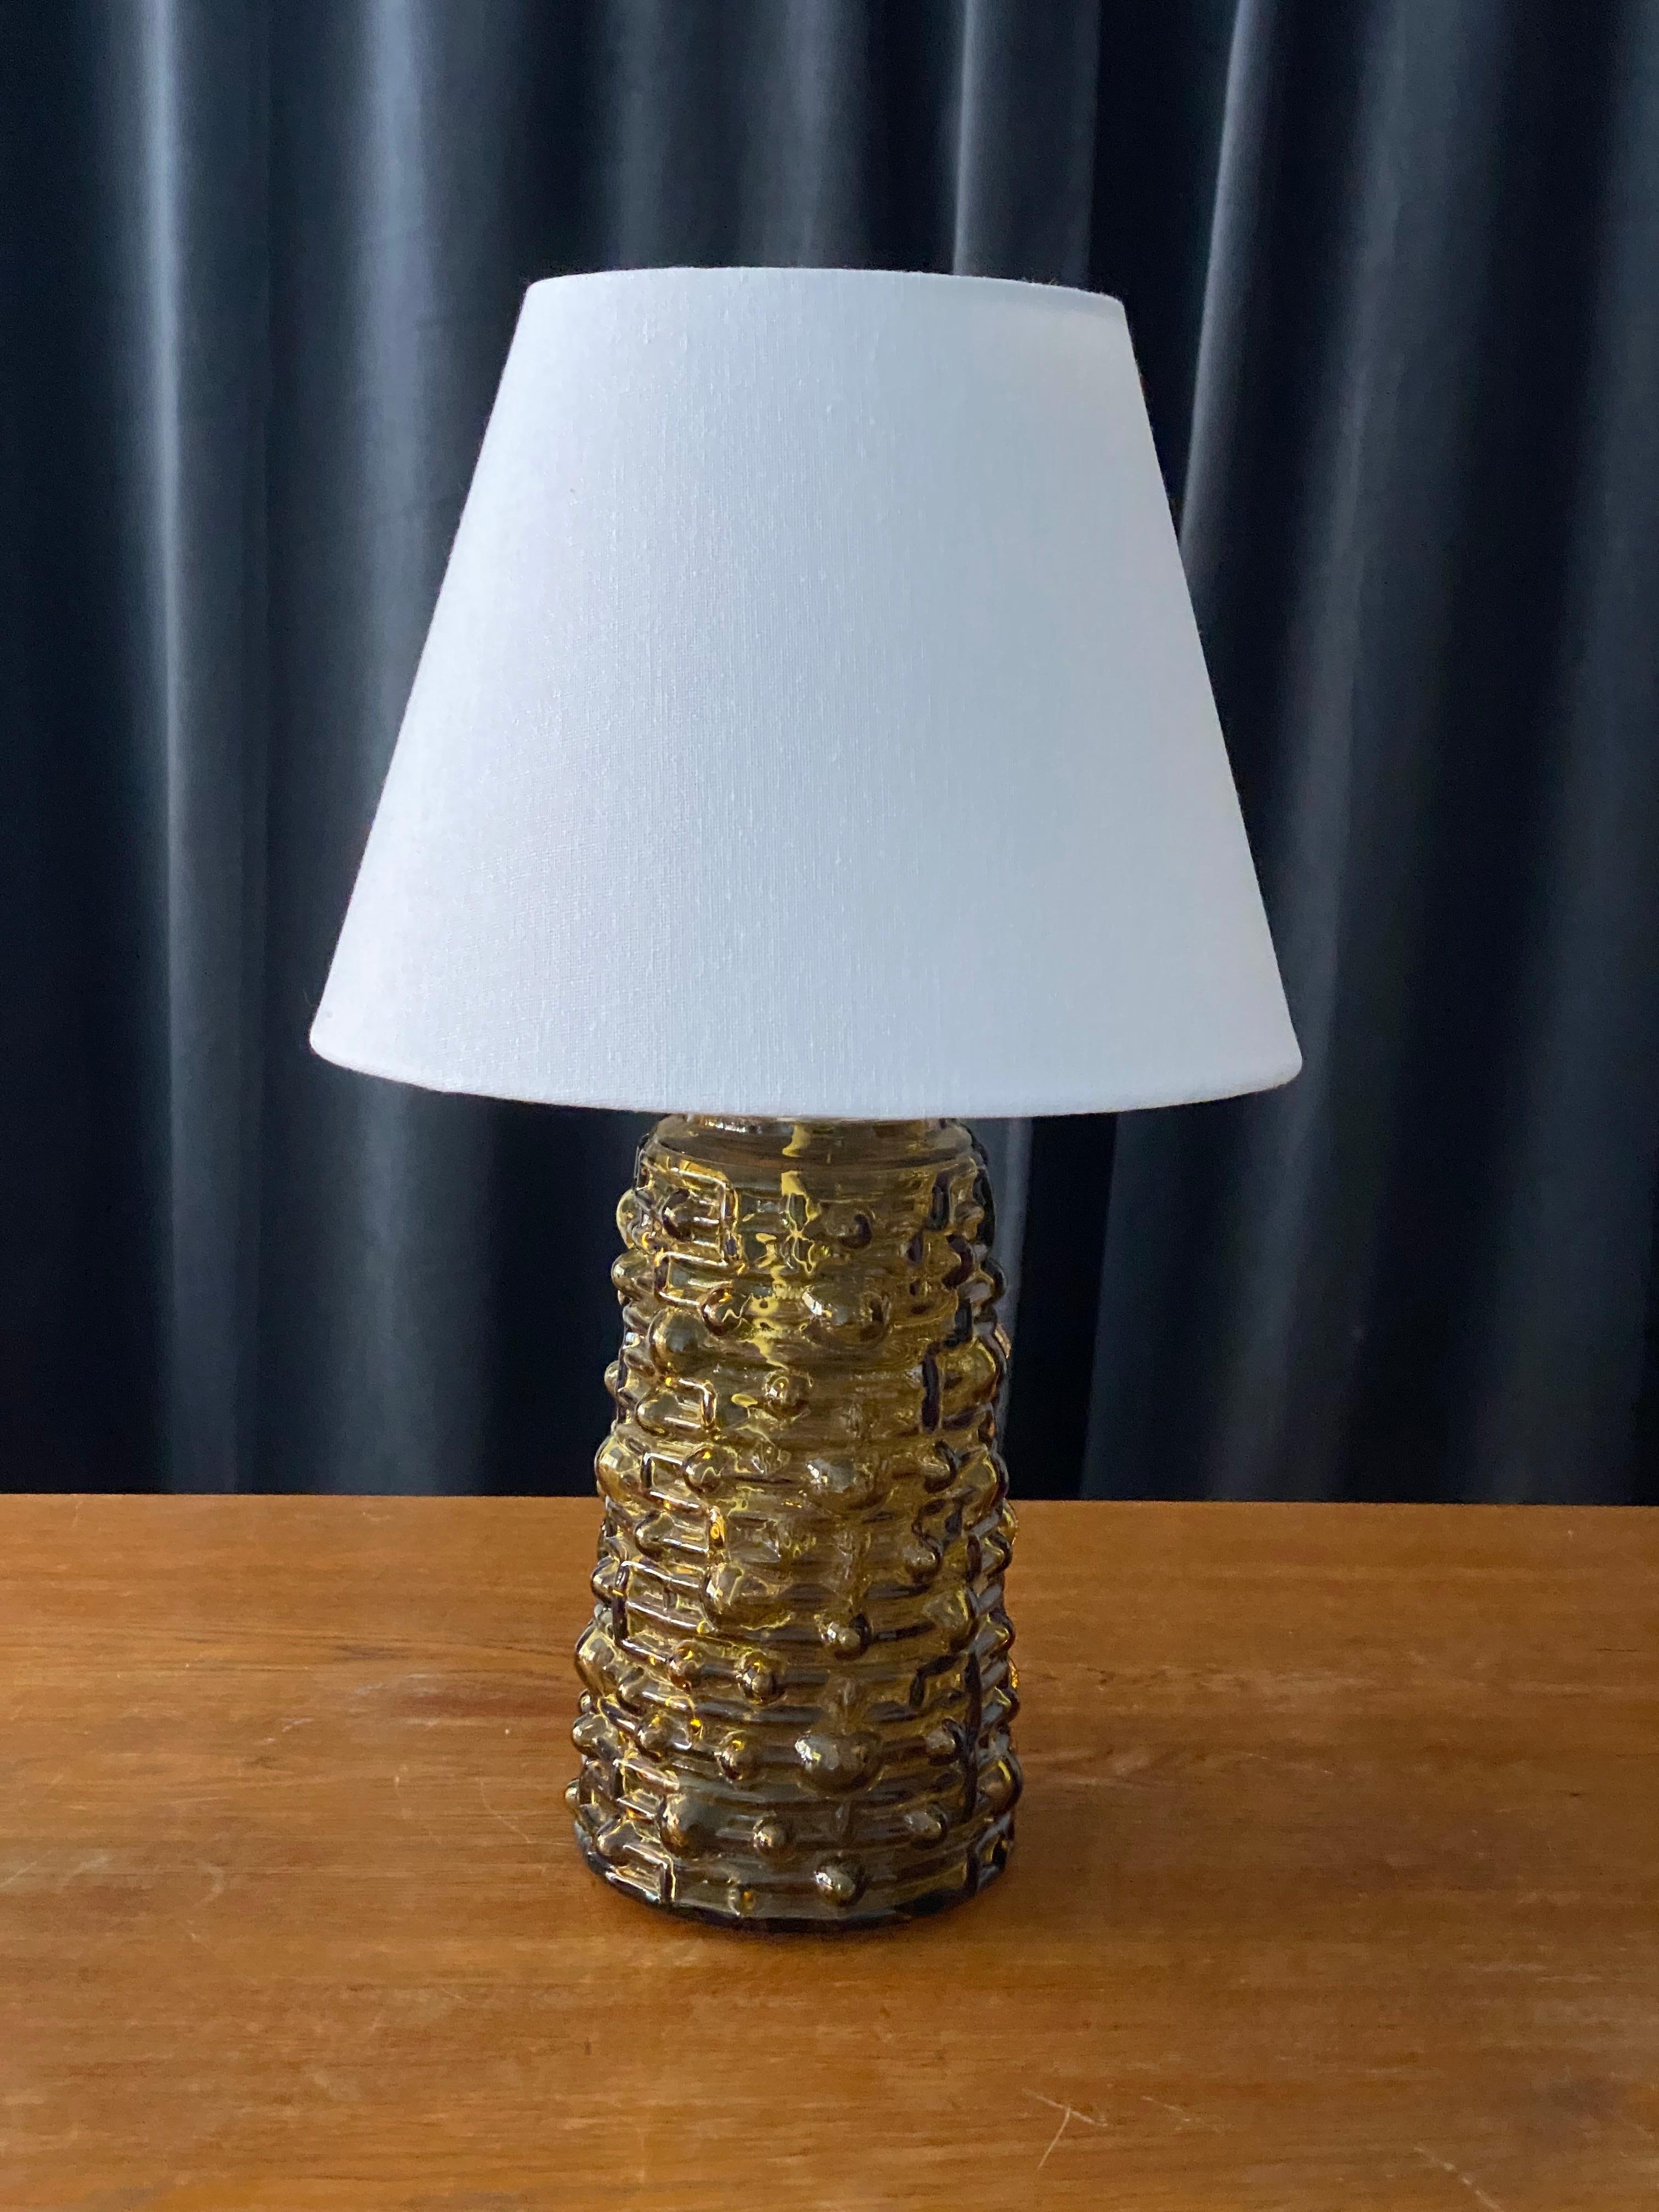 A highly modernist organic table lamp. Of Swedish production. In blown glass, 1950s. Sold without lampshade.

Other designers of the period include Paavo Tynell, Josef Frank, Lisa Johansson-Pape, and Alvar Aalto.